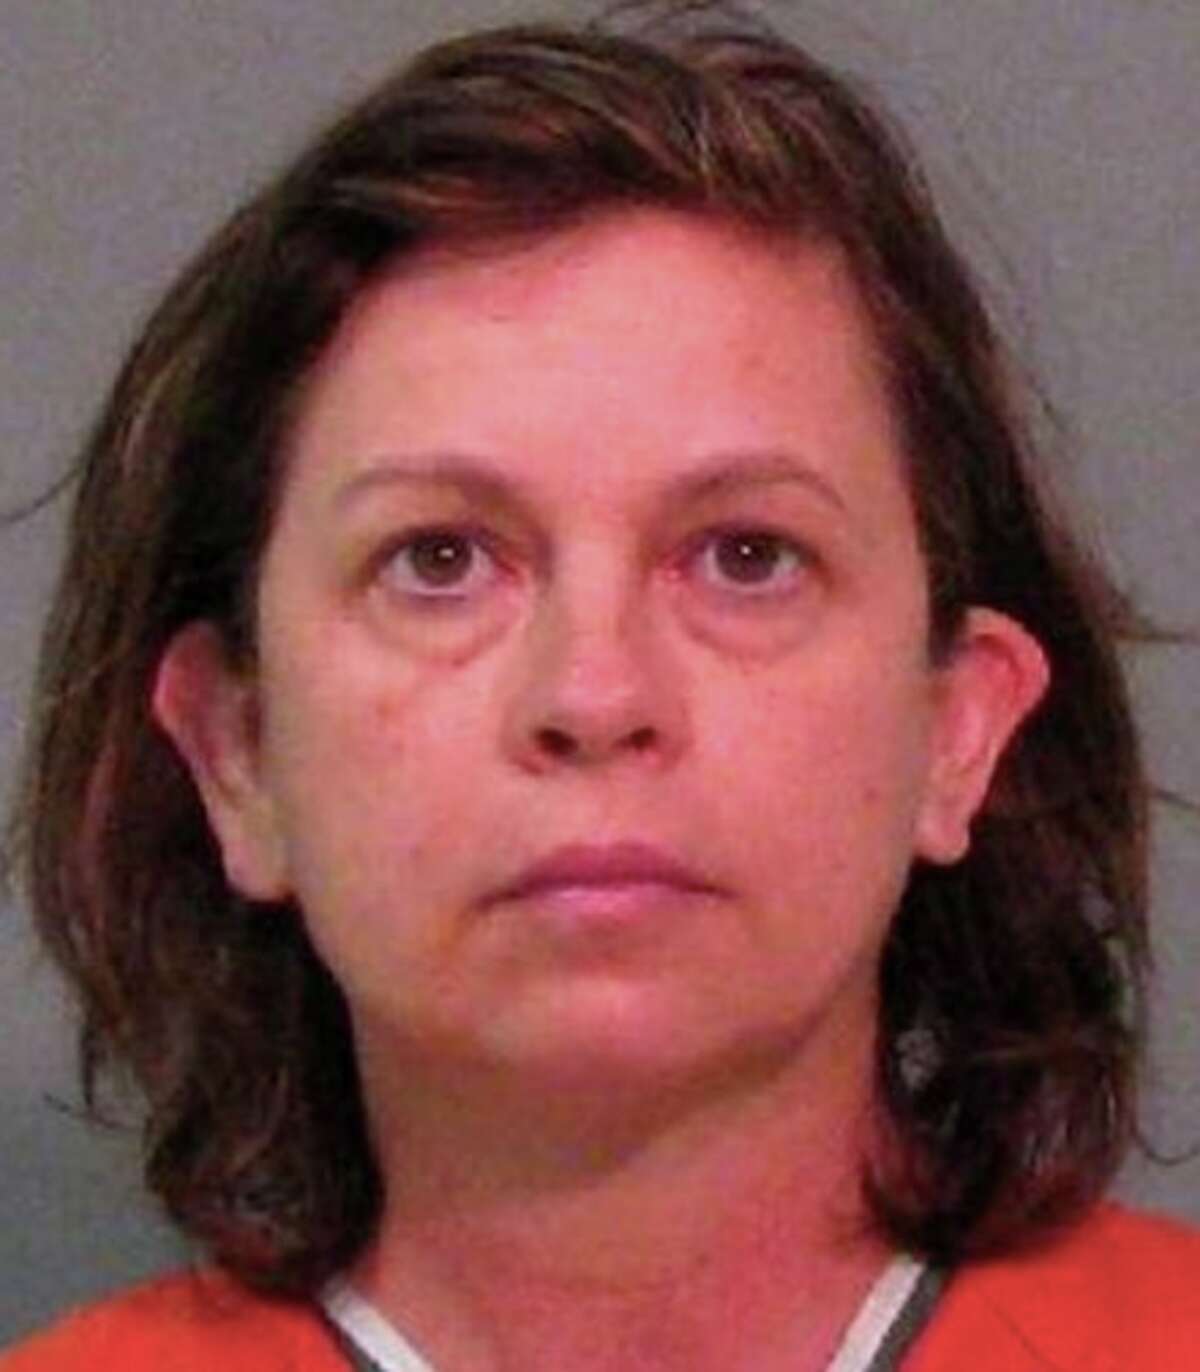 Lana Clayton was charged with malicious tampering with a drug product or food.